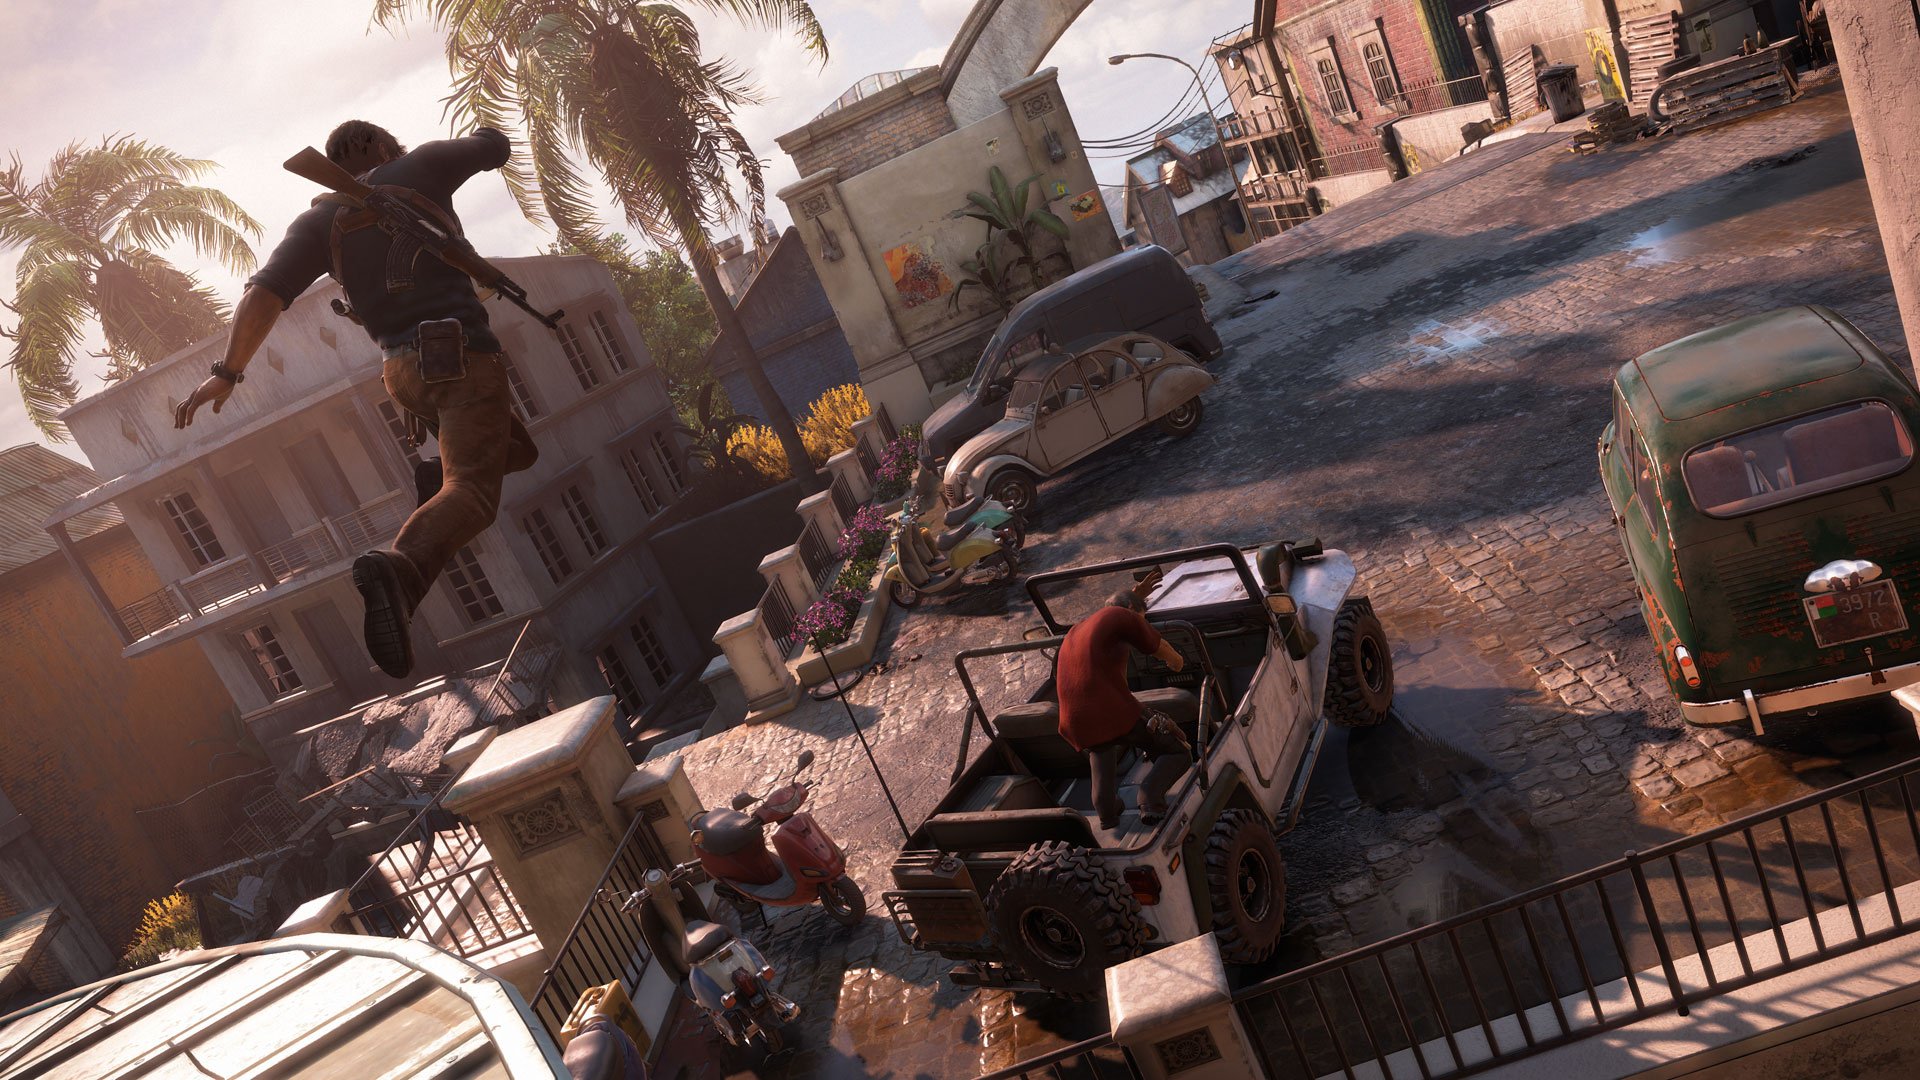 Uncharted 4: A Thief's End review: The last pillage - CNET